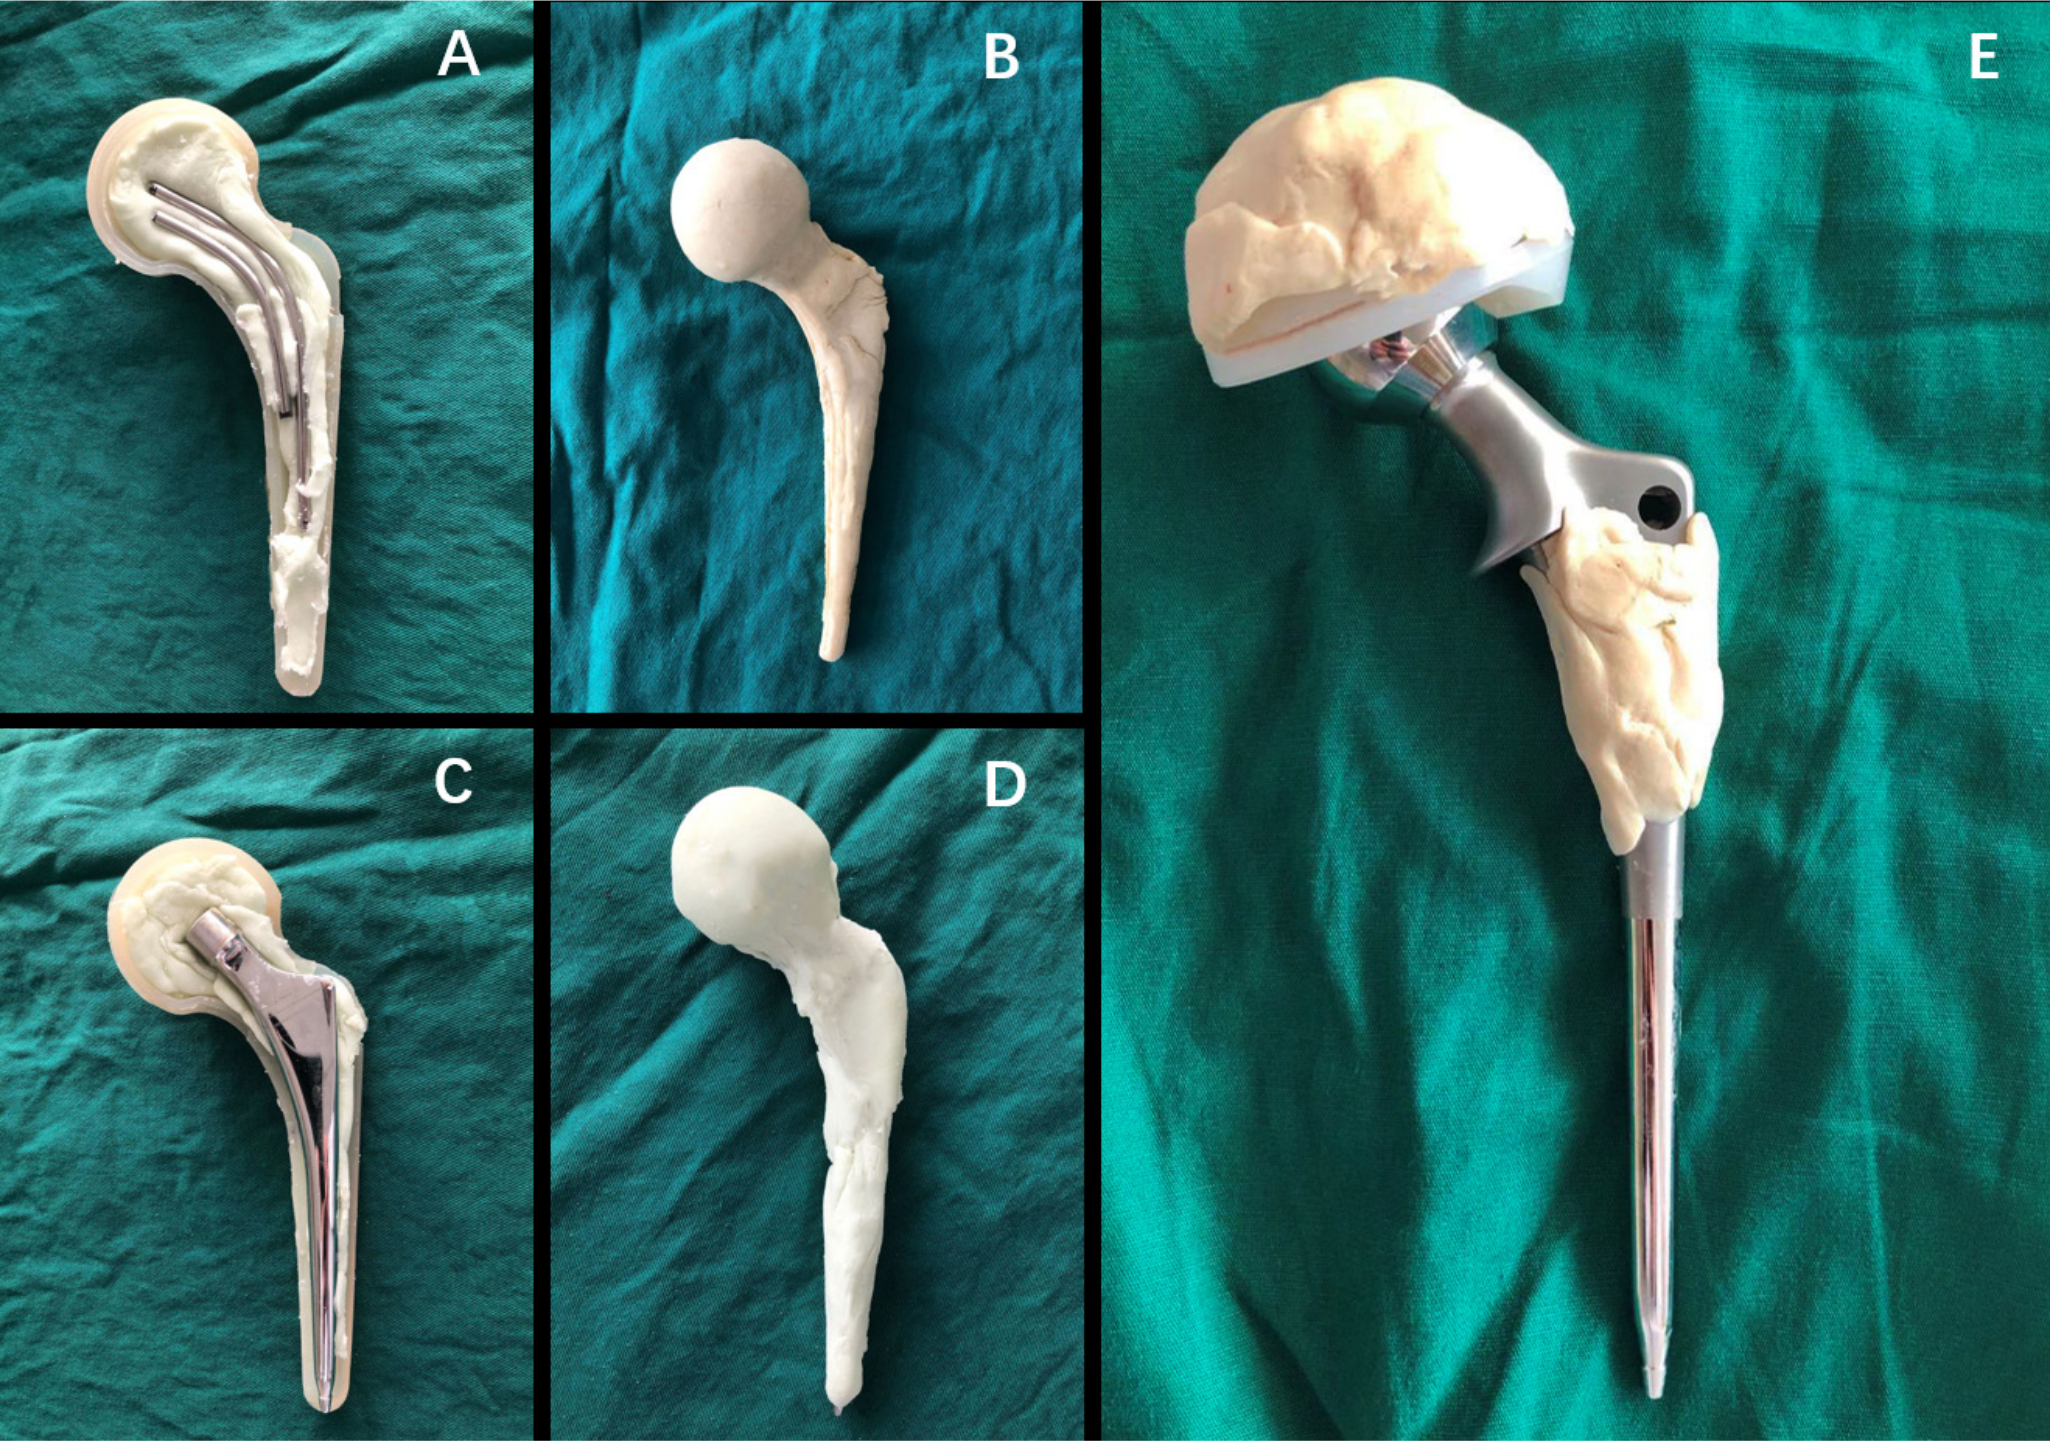 Fig. 1 
             a) and b) Intraoperative photograph showing the coating of two Kirschner-wires with antibiotic cement in group I. c) and d) Intraoperative photograph showing the coating of a small size femoral prosthesis with antibiotic cement in group II. e) Intraoperative photograph of the cemented prosthesis prepared and ready for insertion in group III.
          